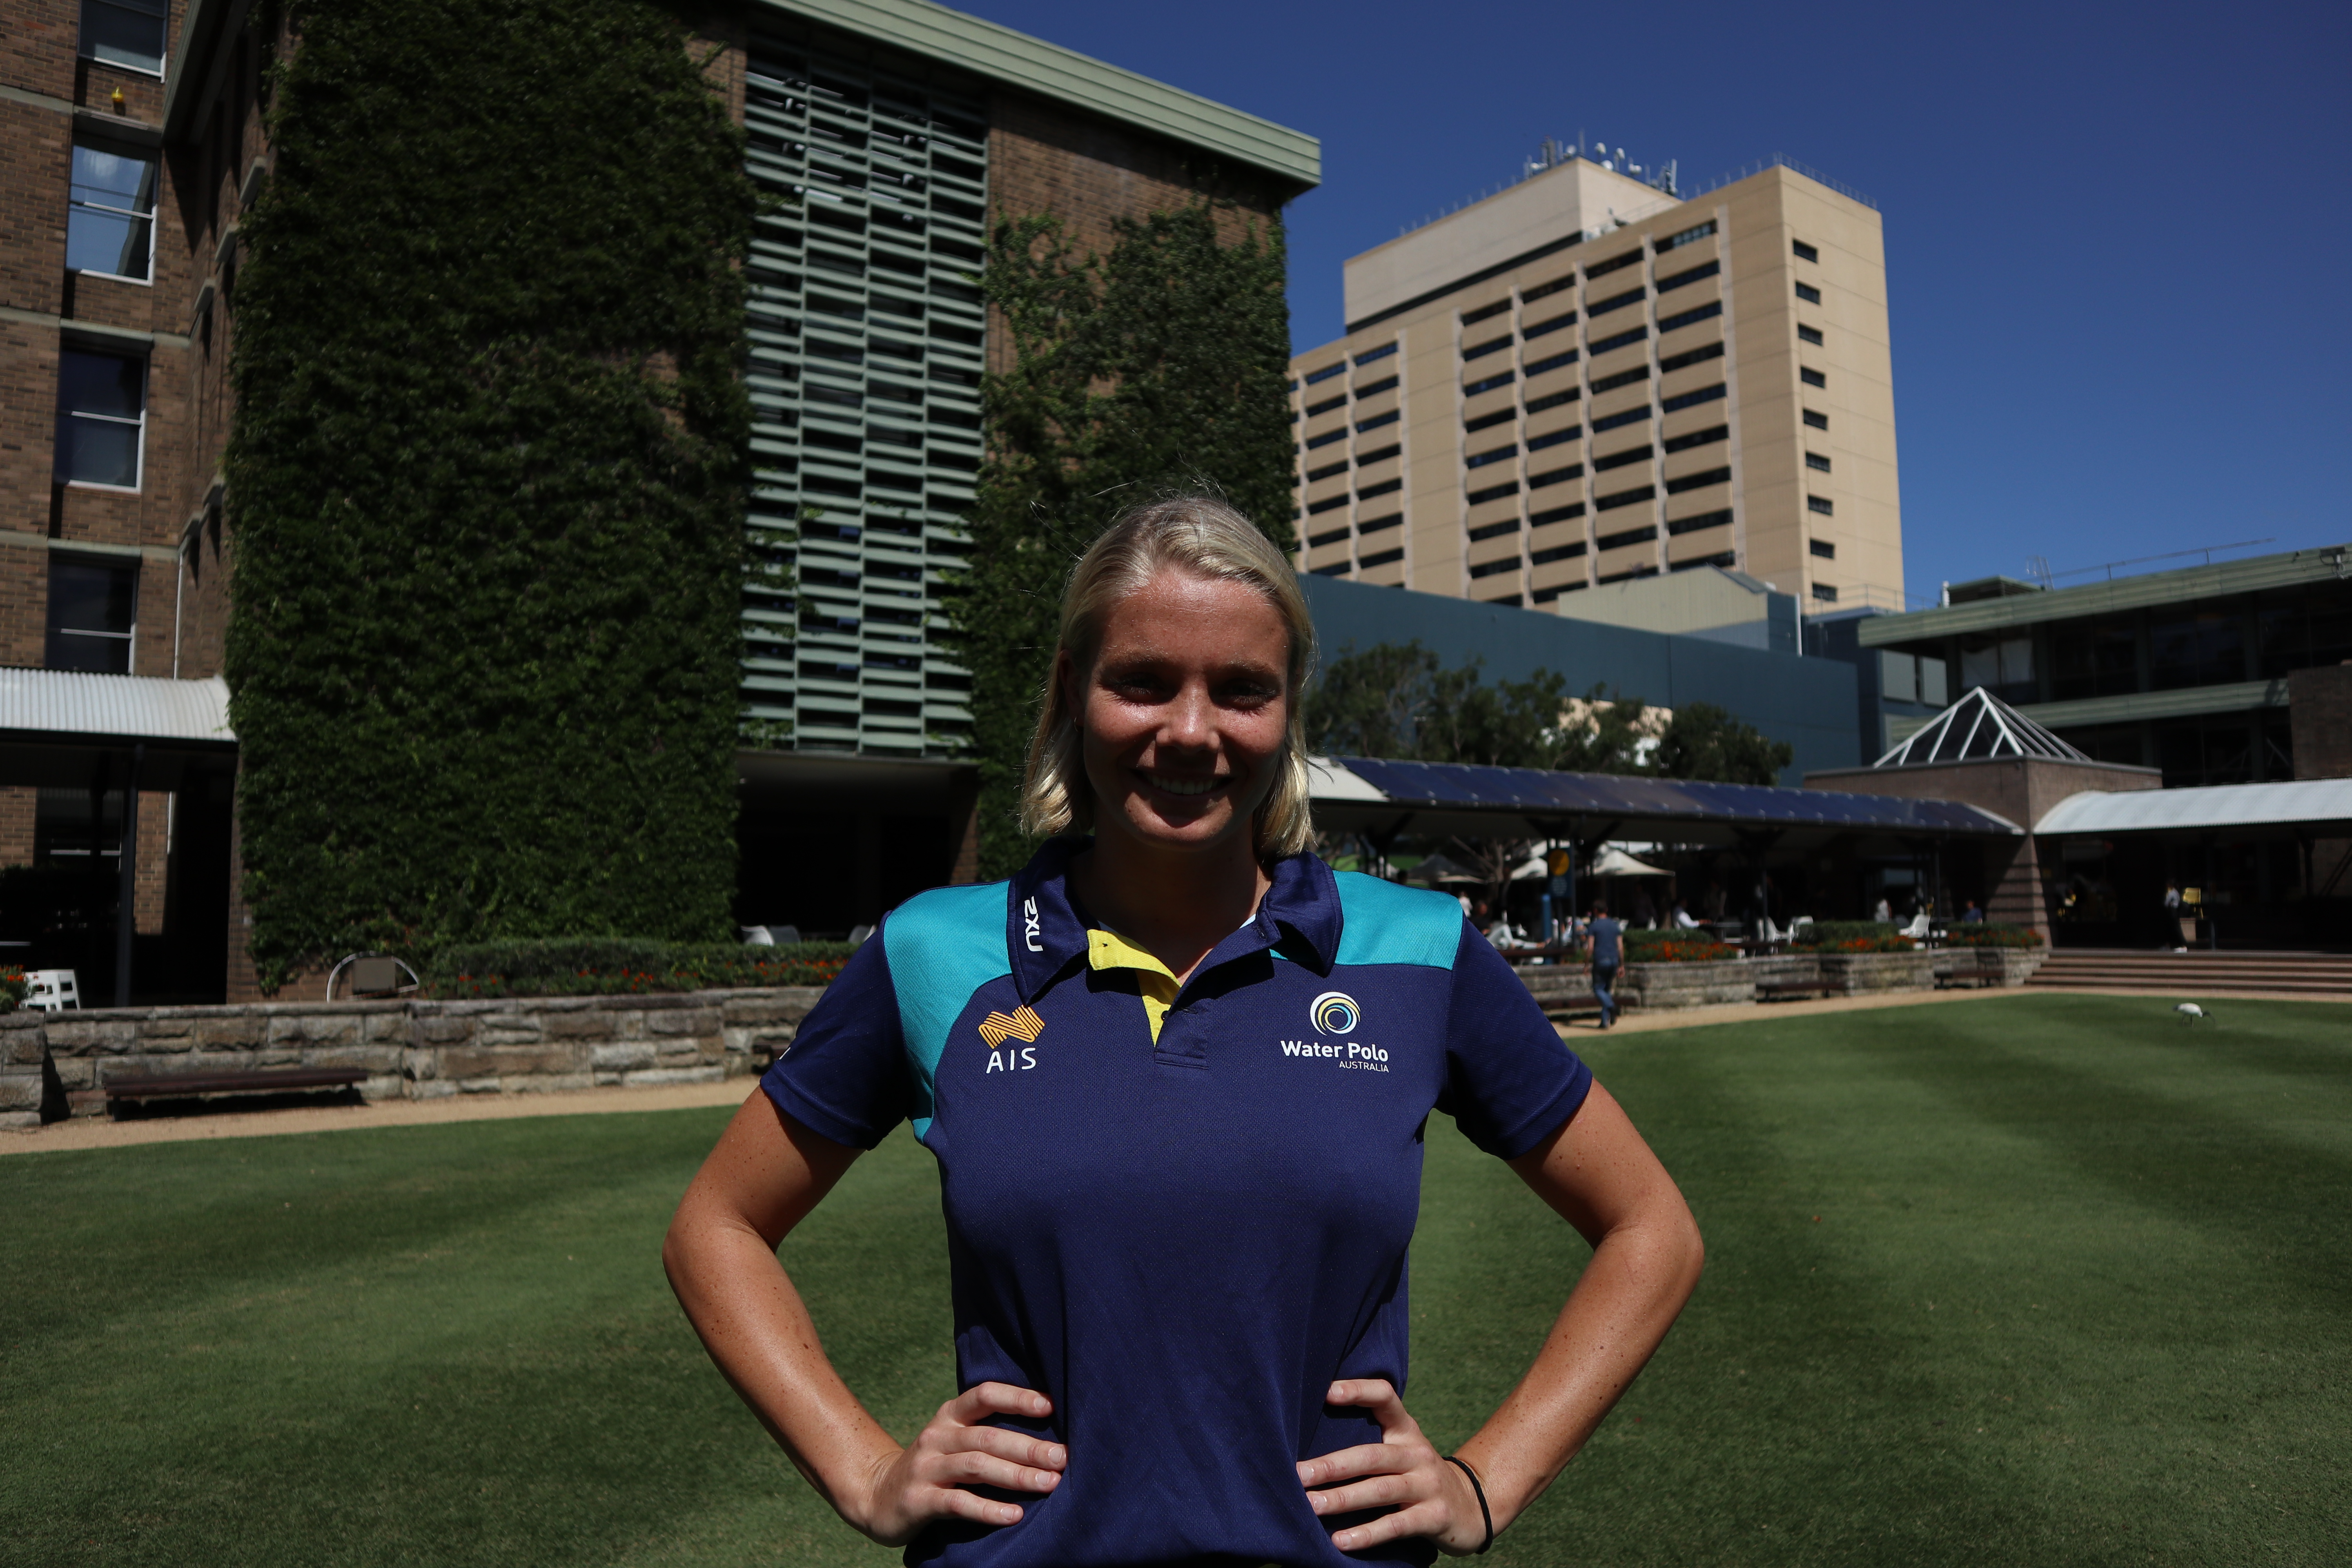 Amy Ridge in Water Polo Australia uniform on the UNSW Library Lawn